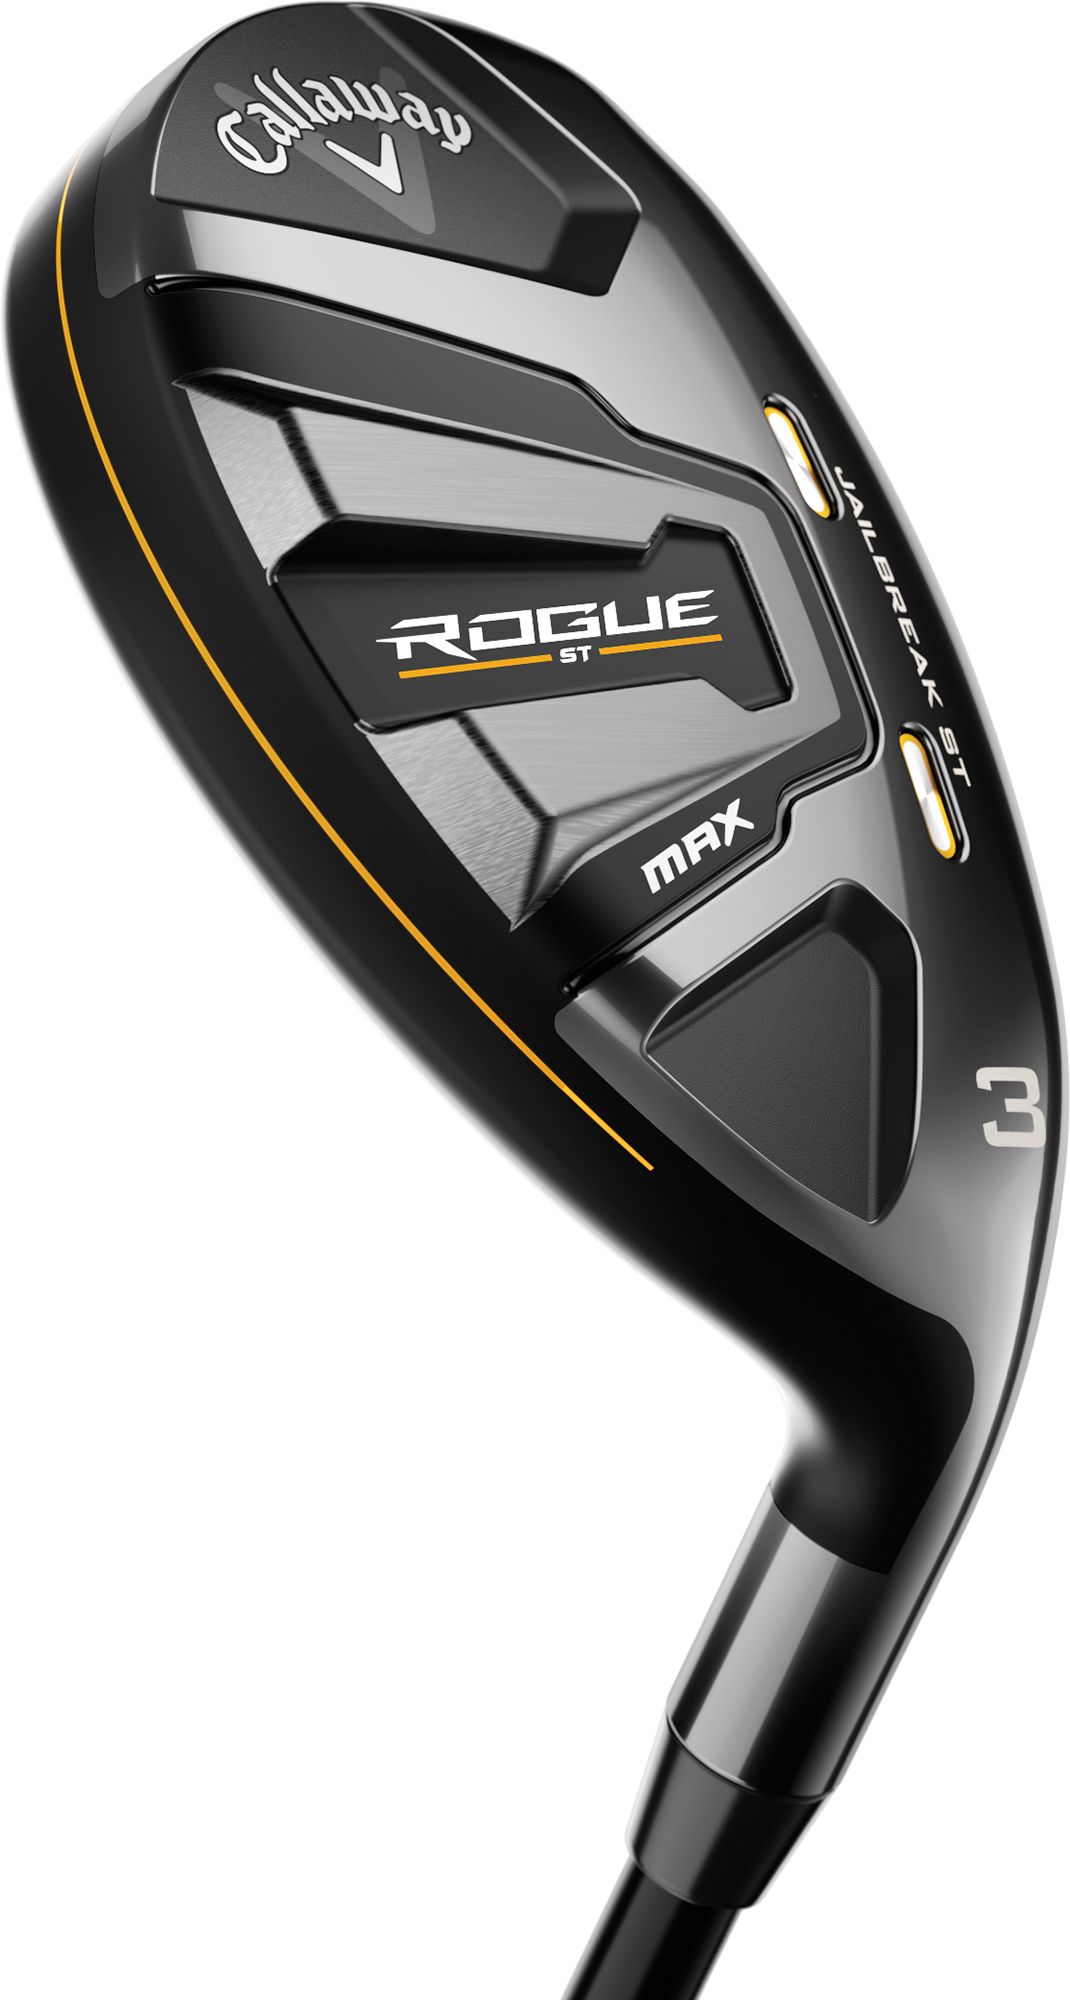 Callaway Rogue ST MAX Hybrid/Irons | Dick's Sporting Goods